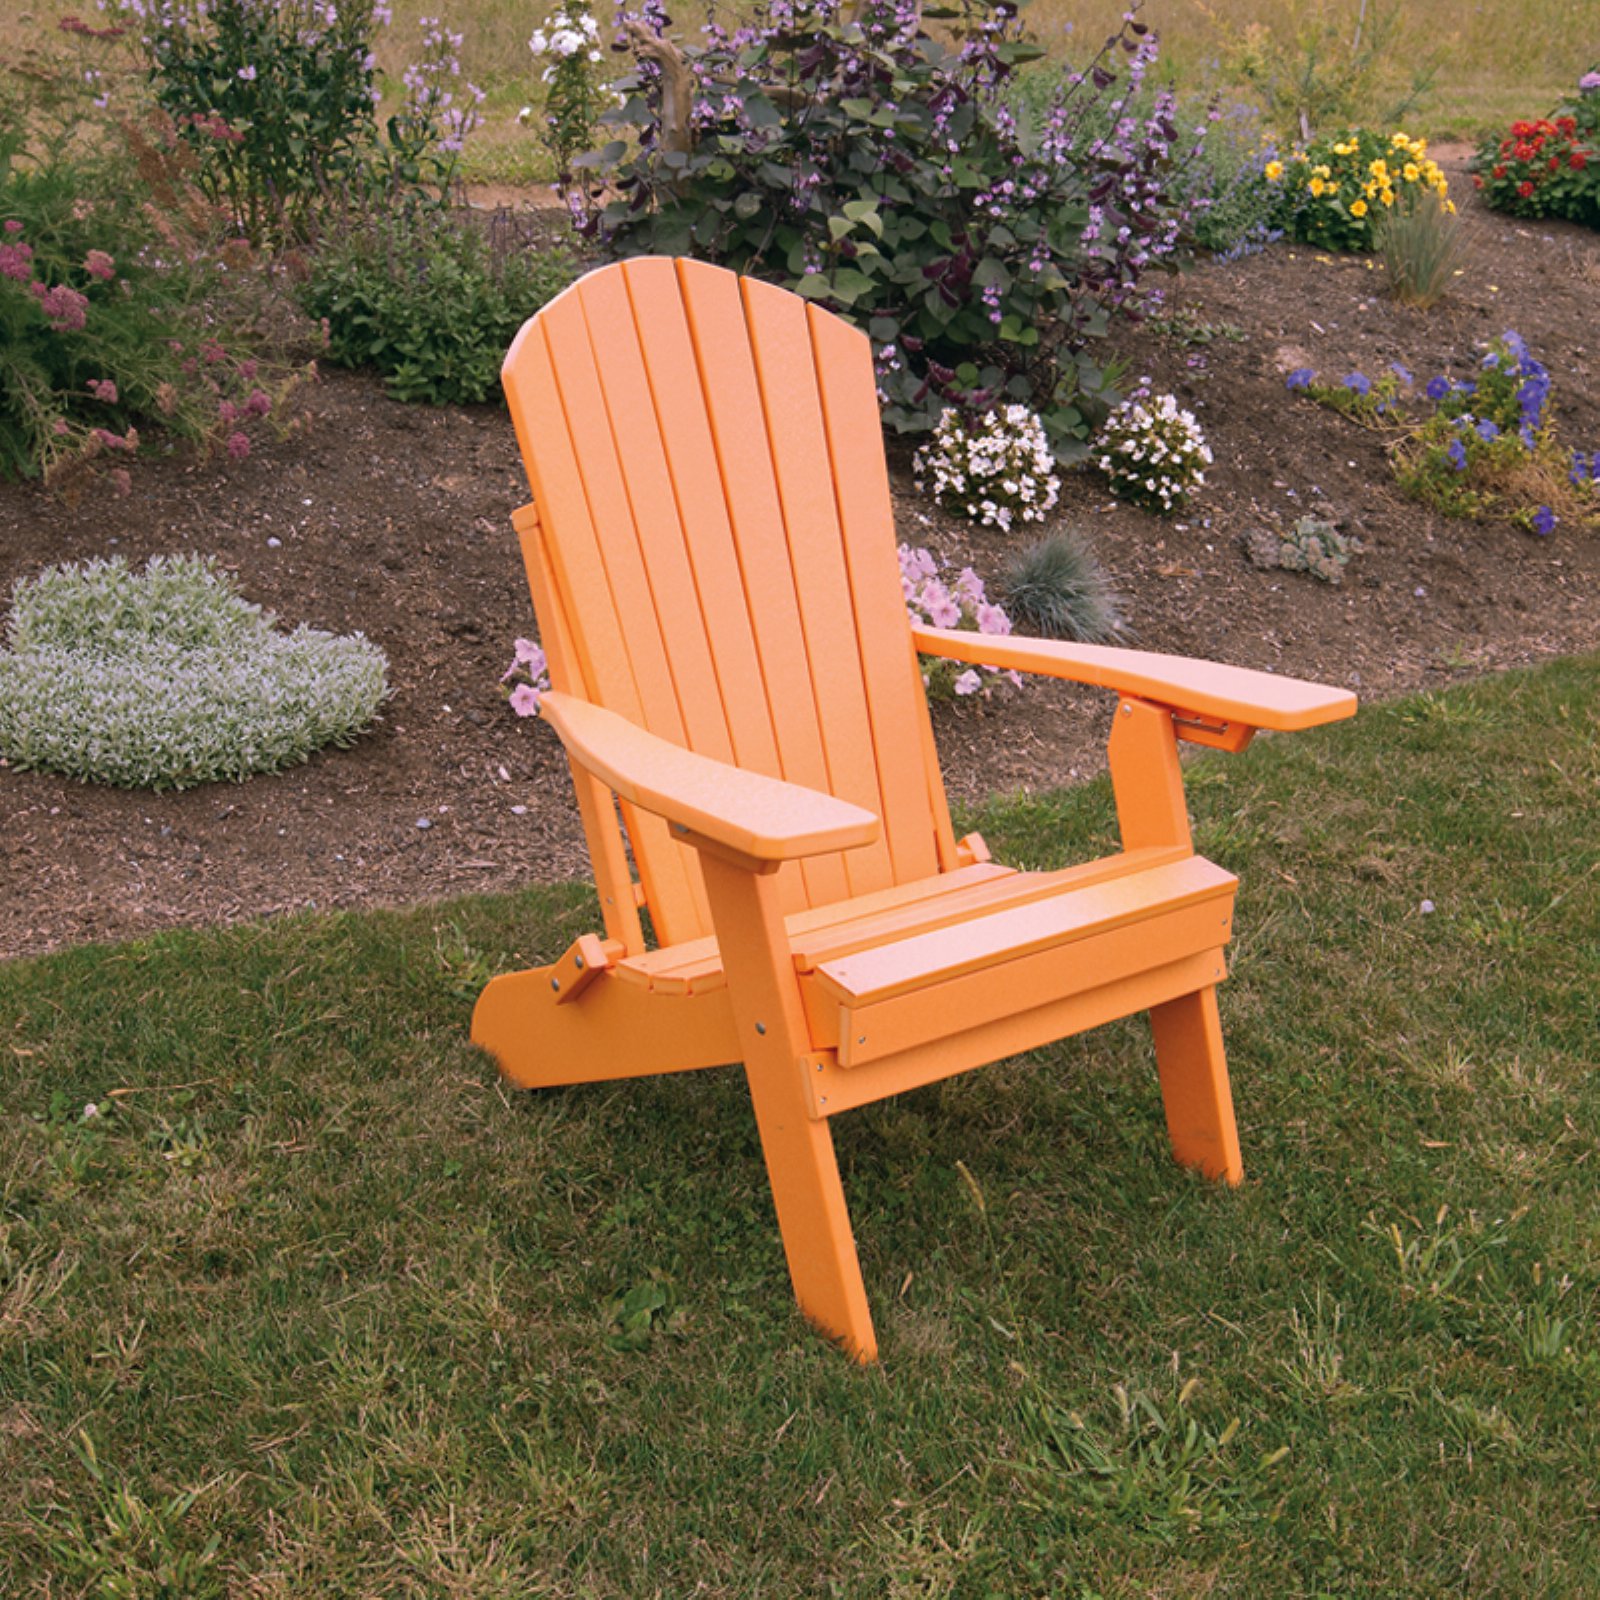 A &amp; L Furniture Fanback Recycled Plastic Folding And Reclining Adirondack Chair - image 3 of 6